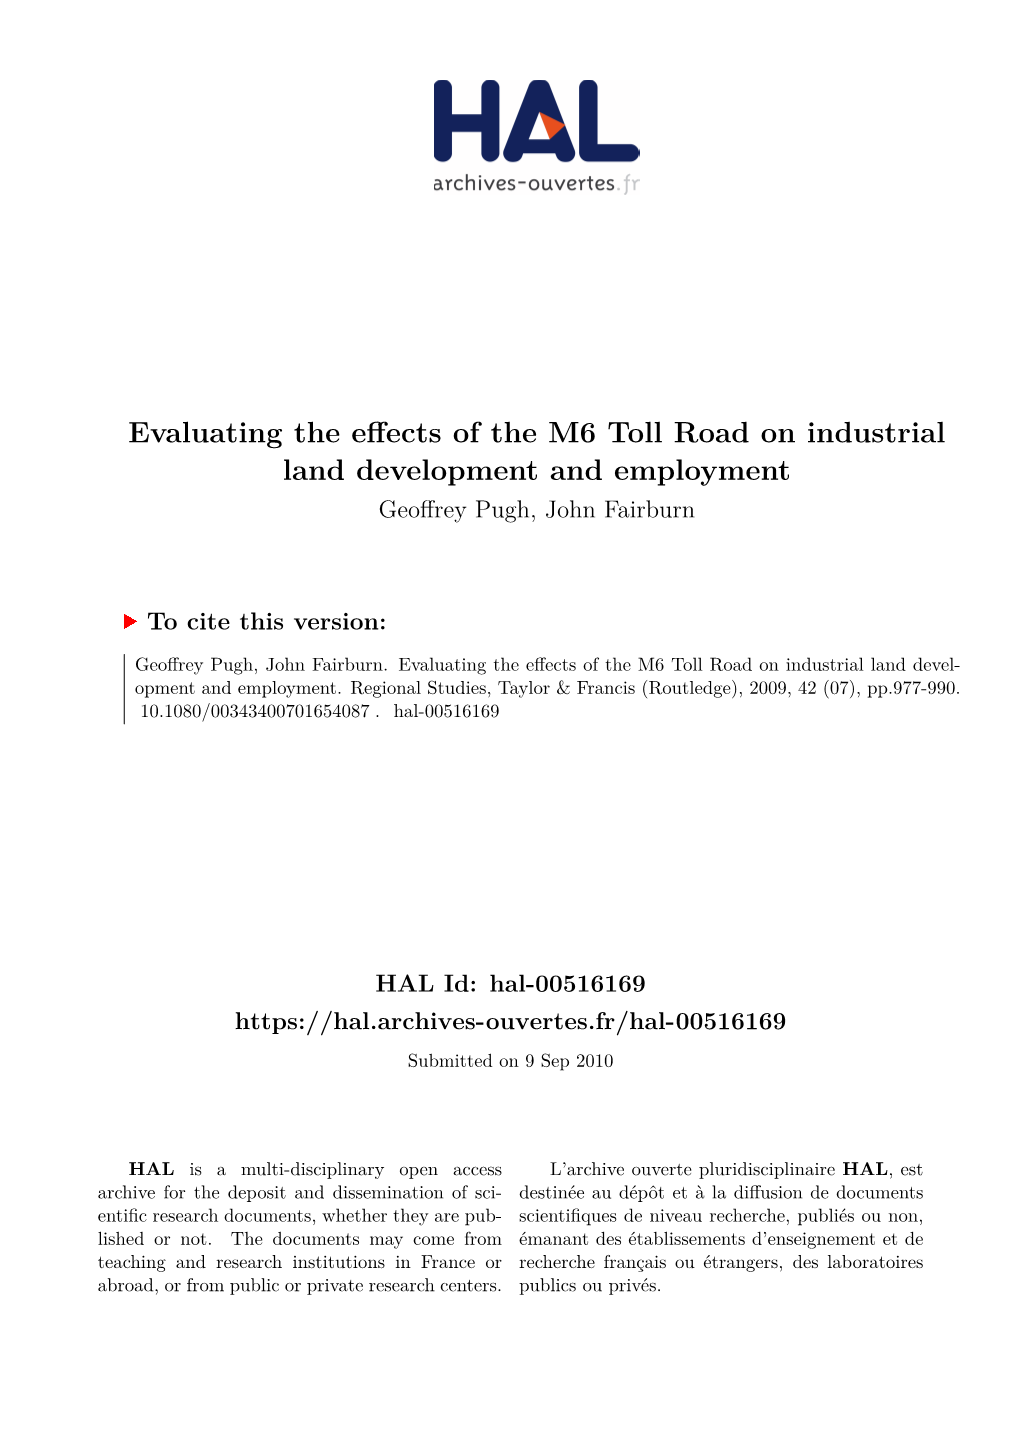 Evaluating the Effects of the M6 Toll Road on Industrial Land Development and Employment Geoffrey Pugh, John Fairburn